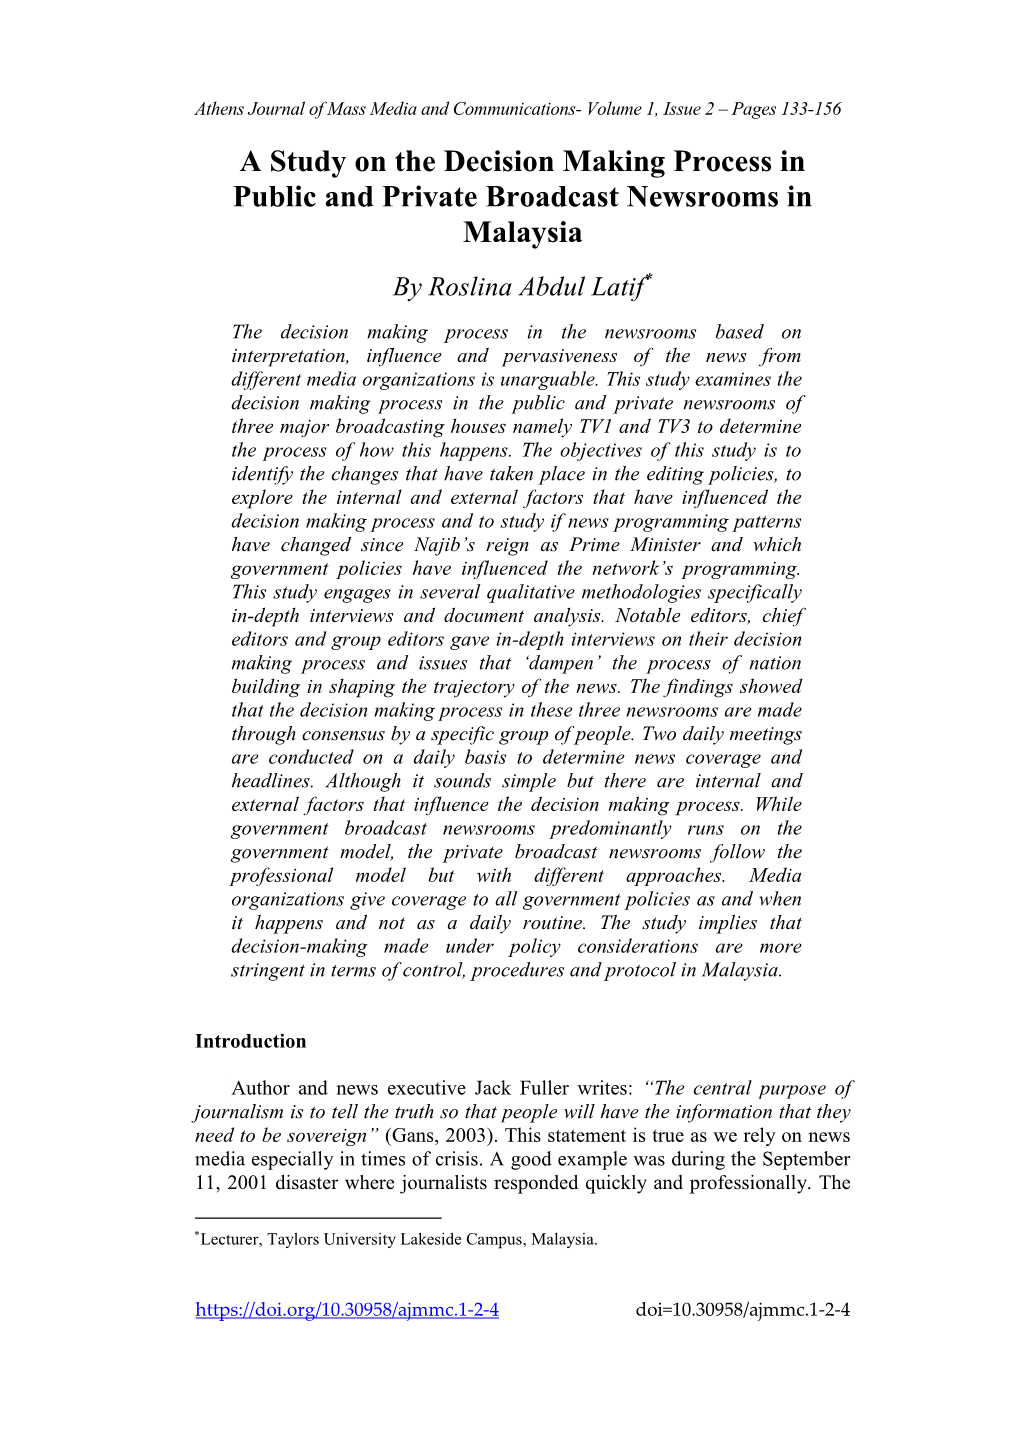 A Study on the Decision Making Process in Public and Private Broadcast Newsrooms in Malaysia